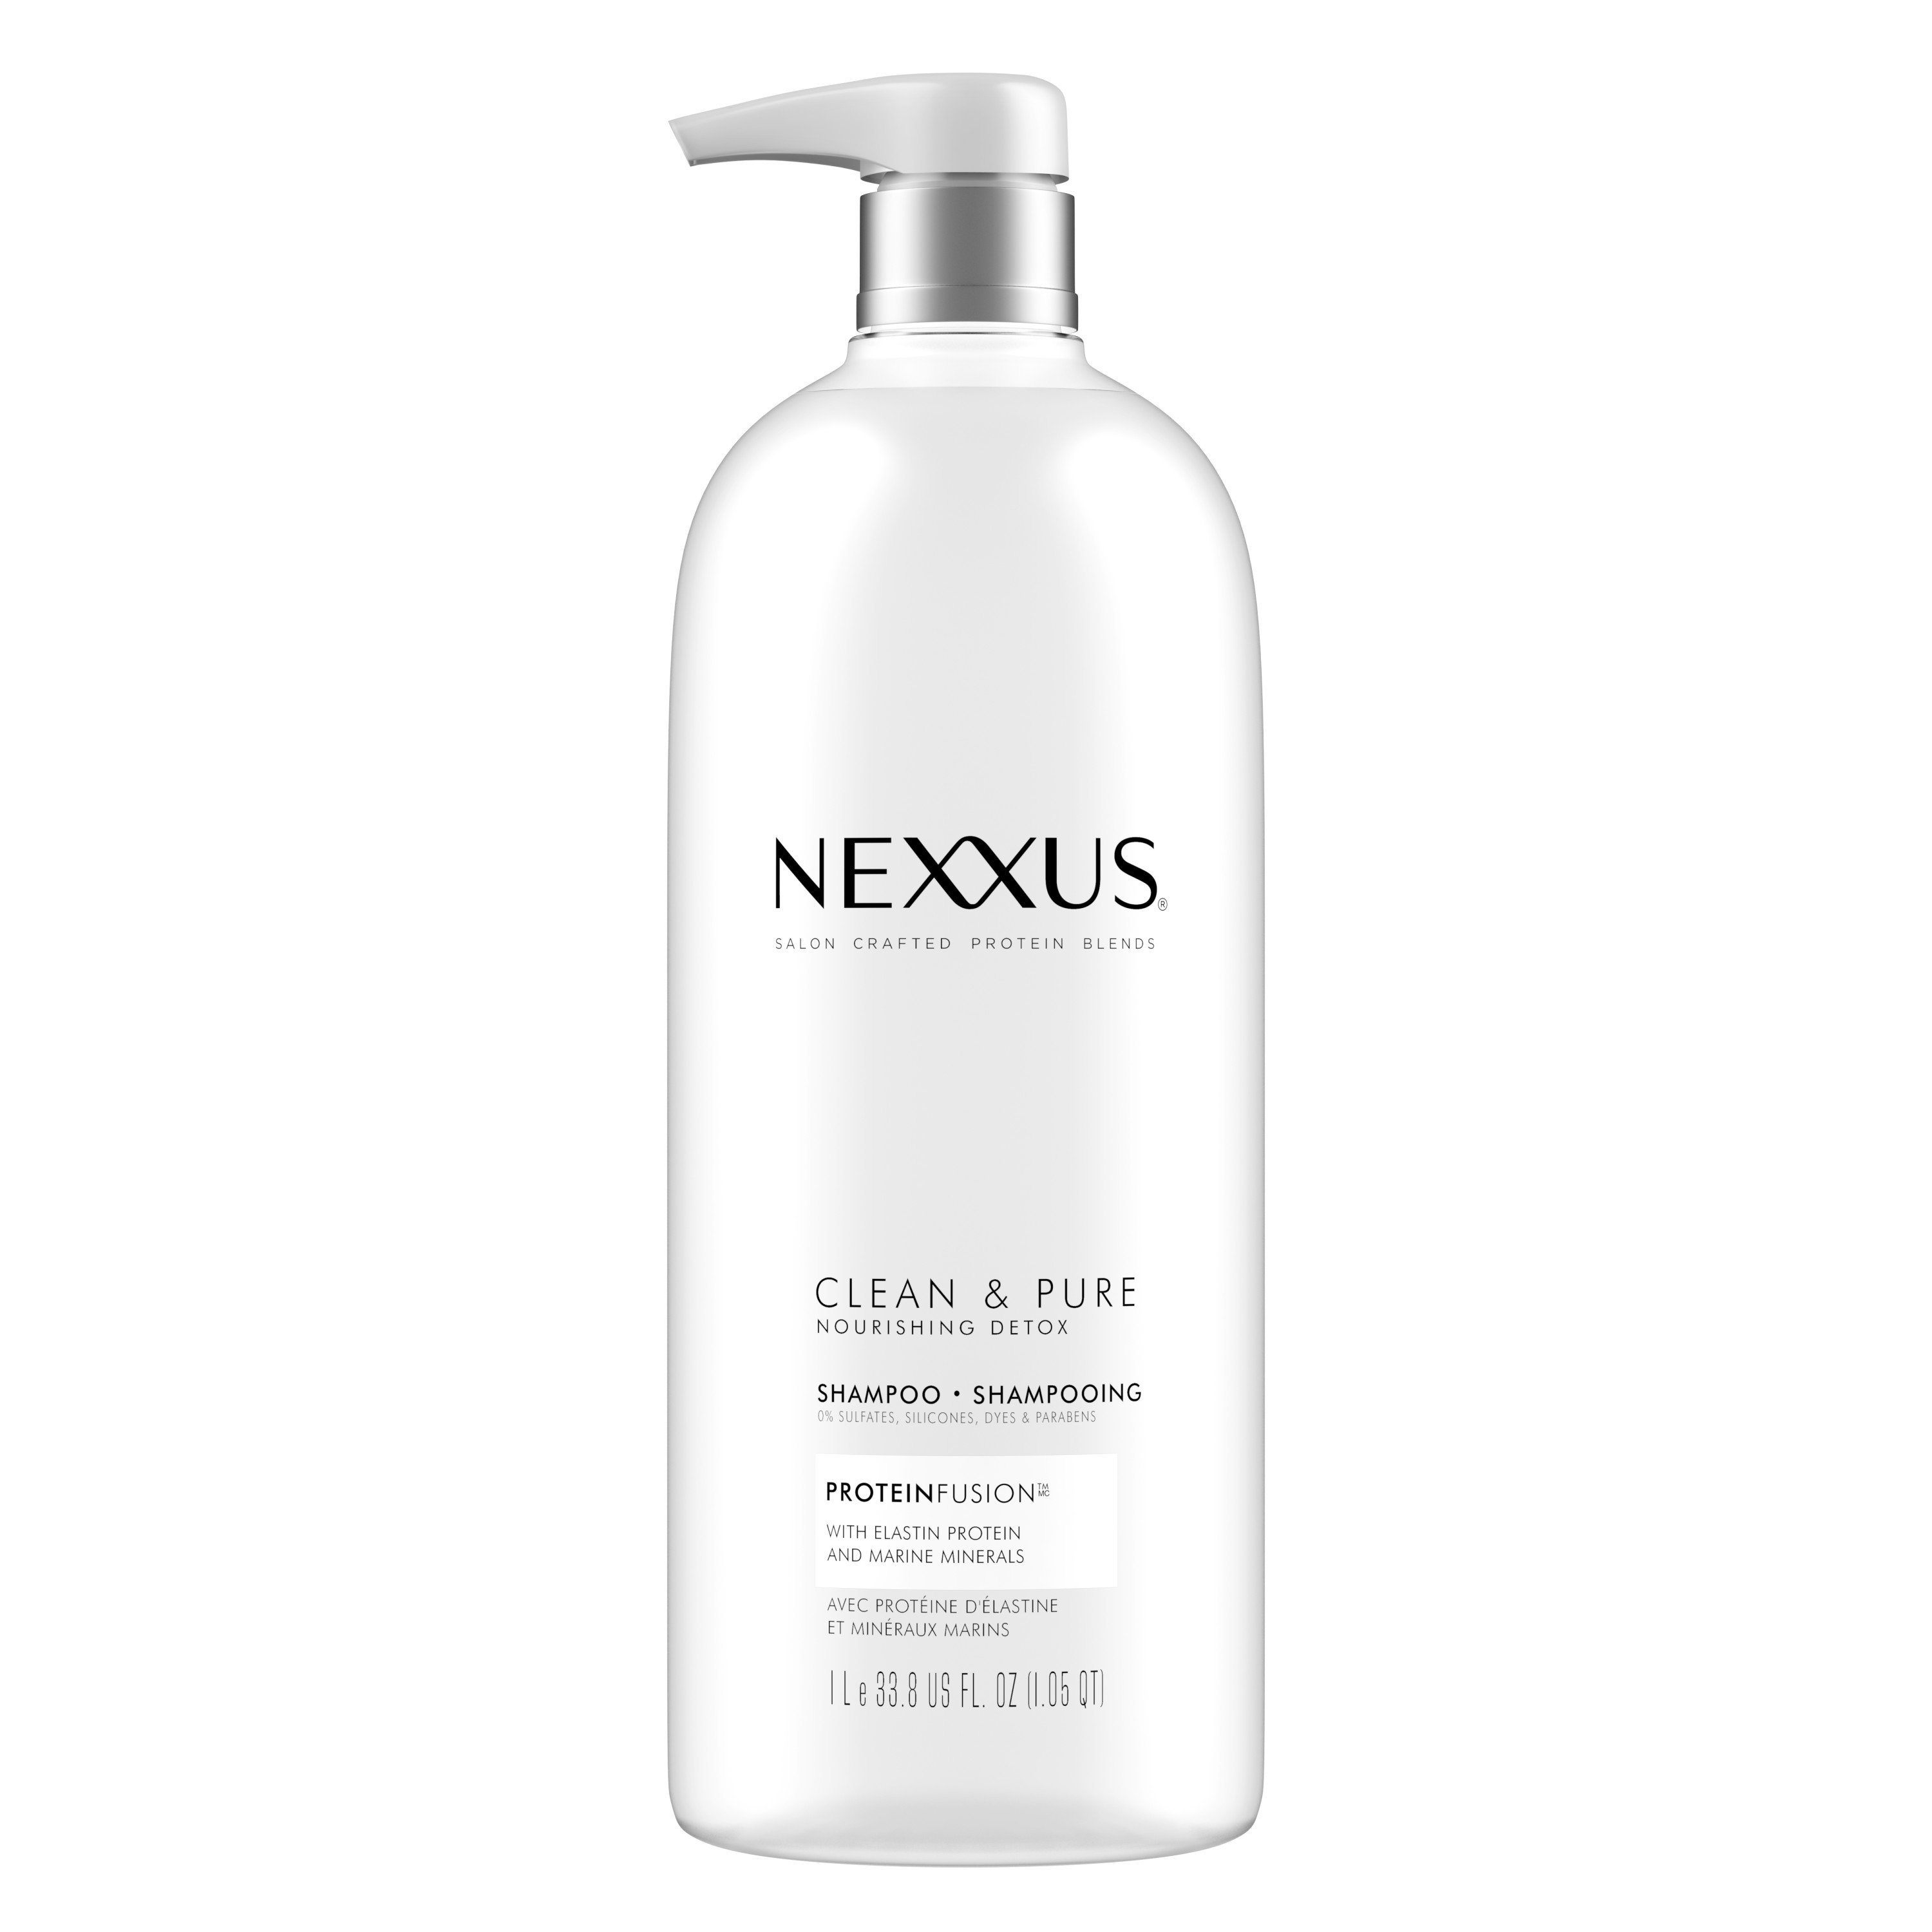 Nexxus Dry Shampoo Refreshing Mist - Shop Styling Products & Treatments at  H-E-B